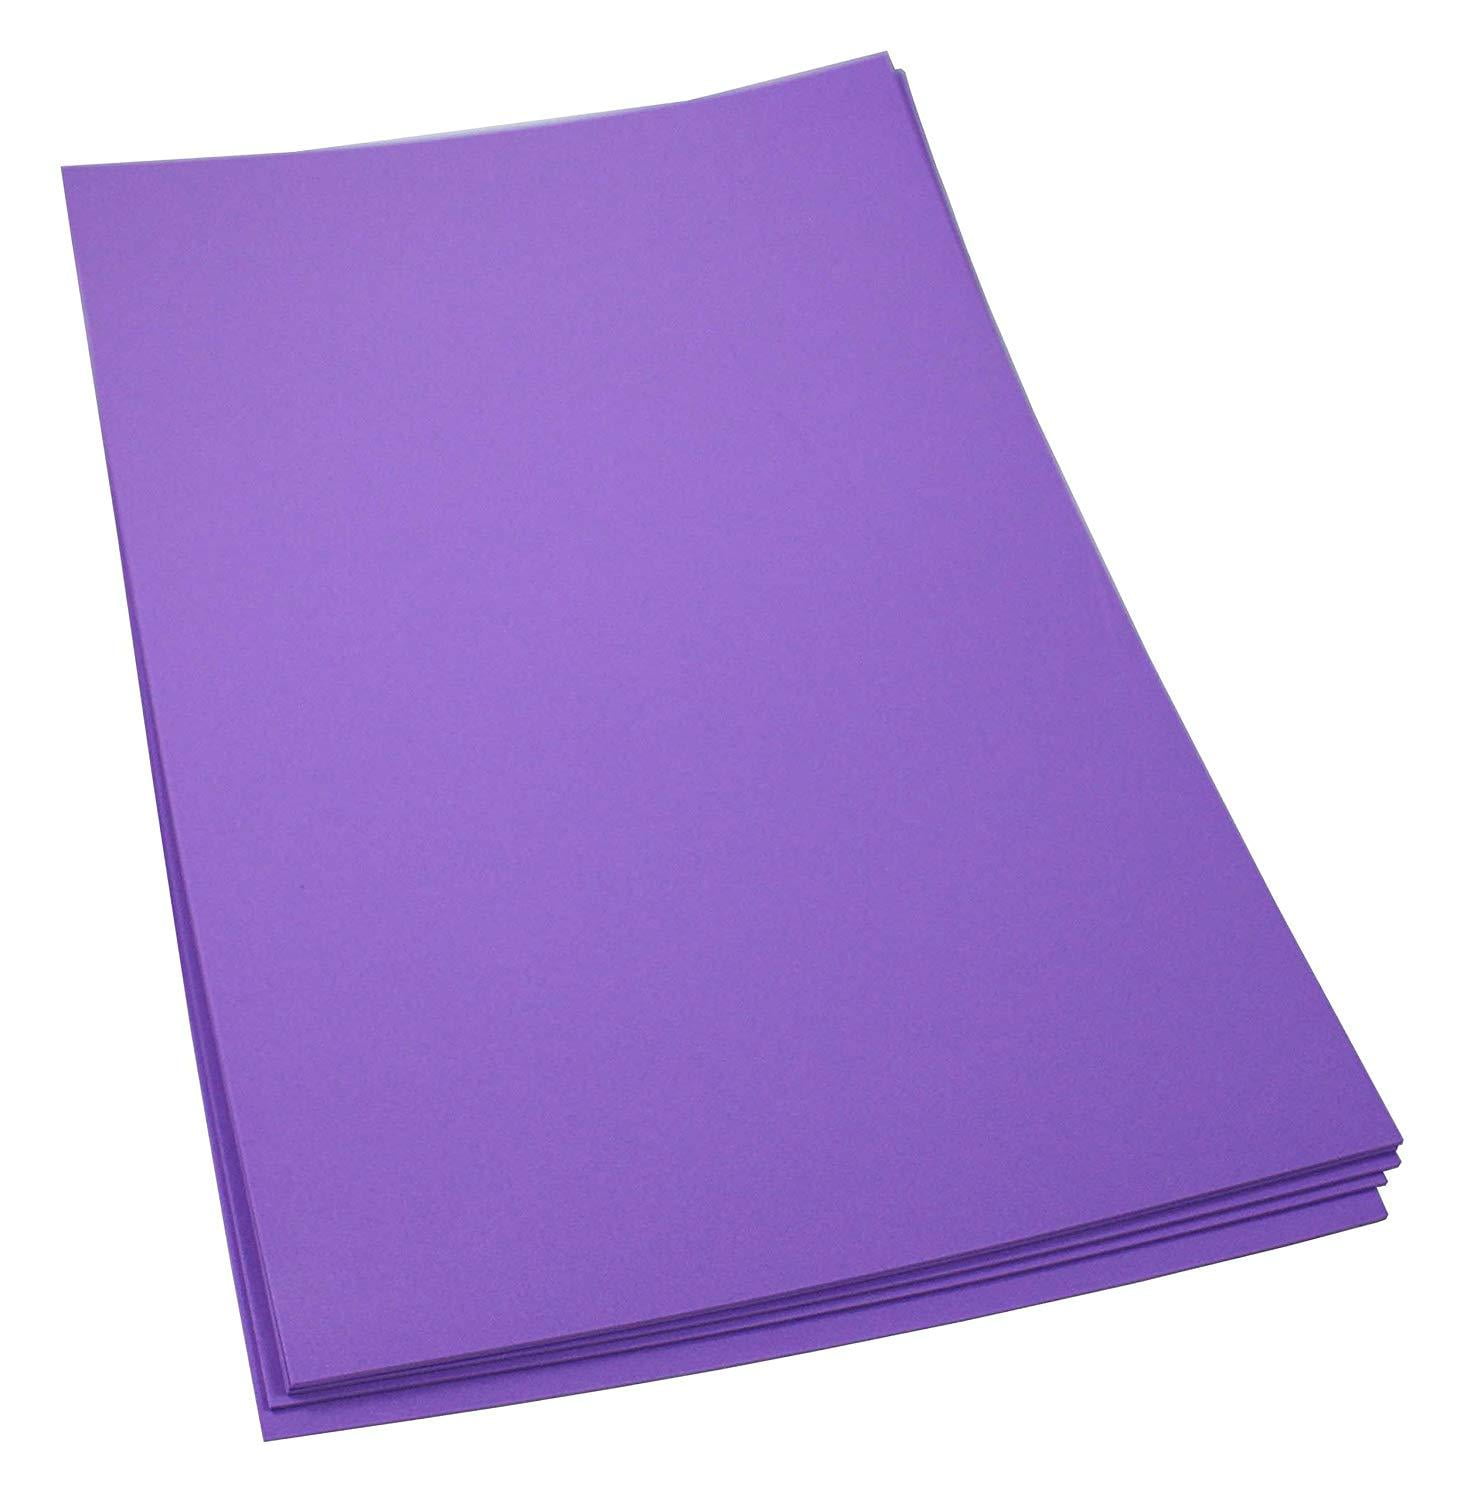 Craft Foam Sheets--12 x 18 Inches - Mint - 5 Sheets-2 MM Thick